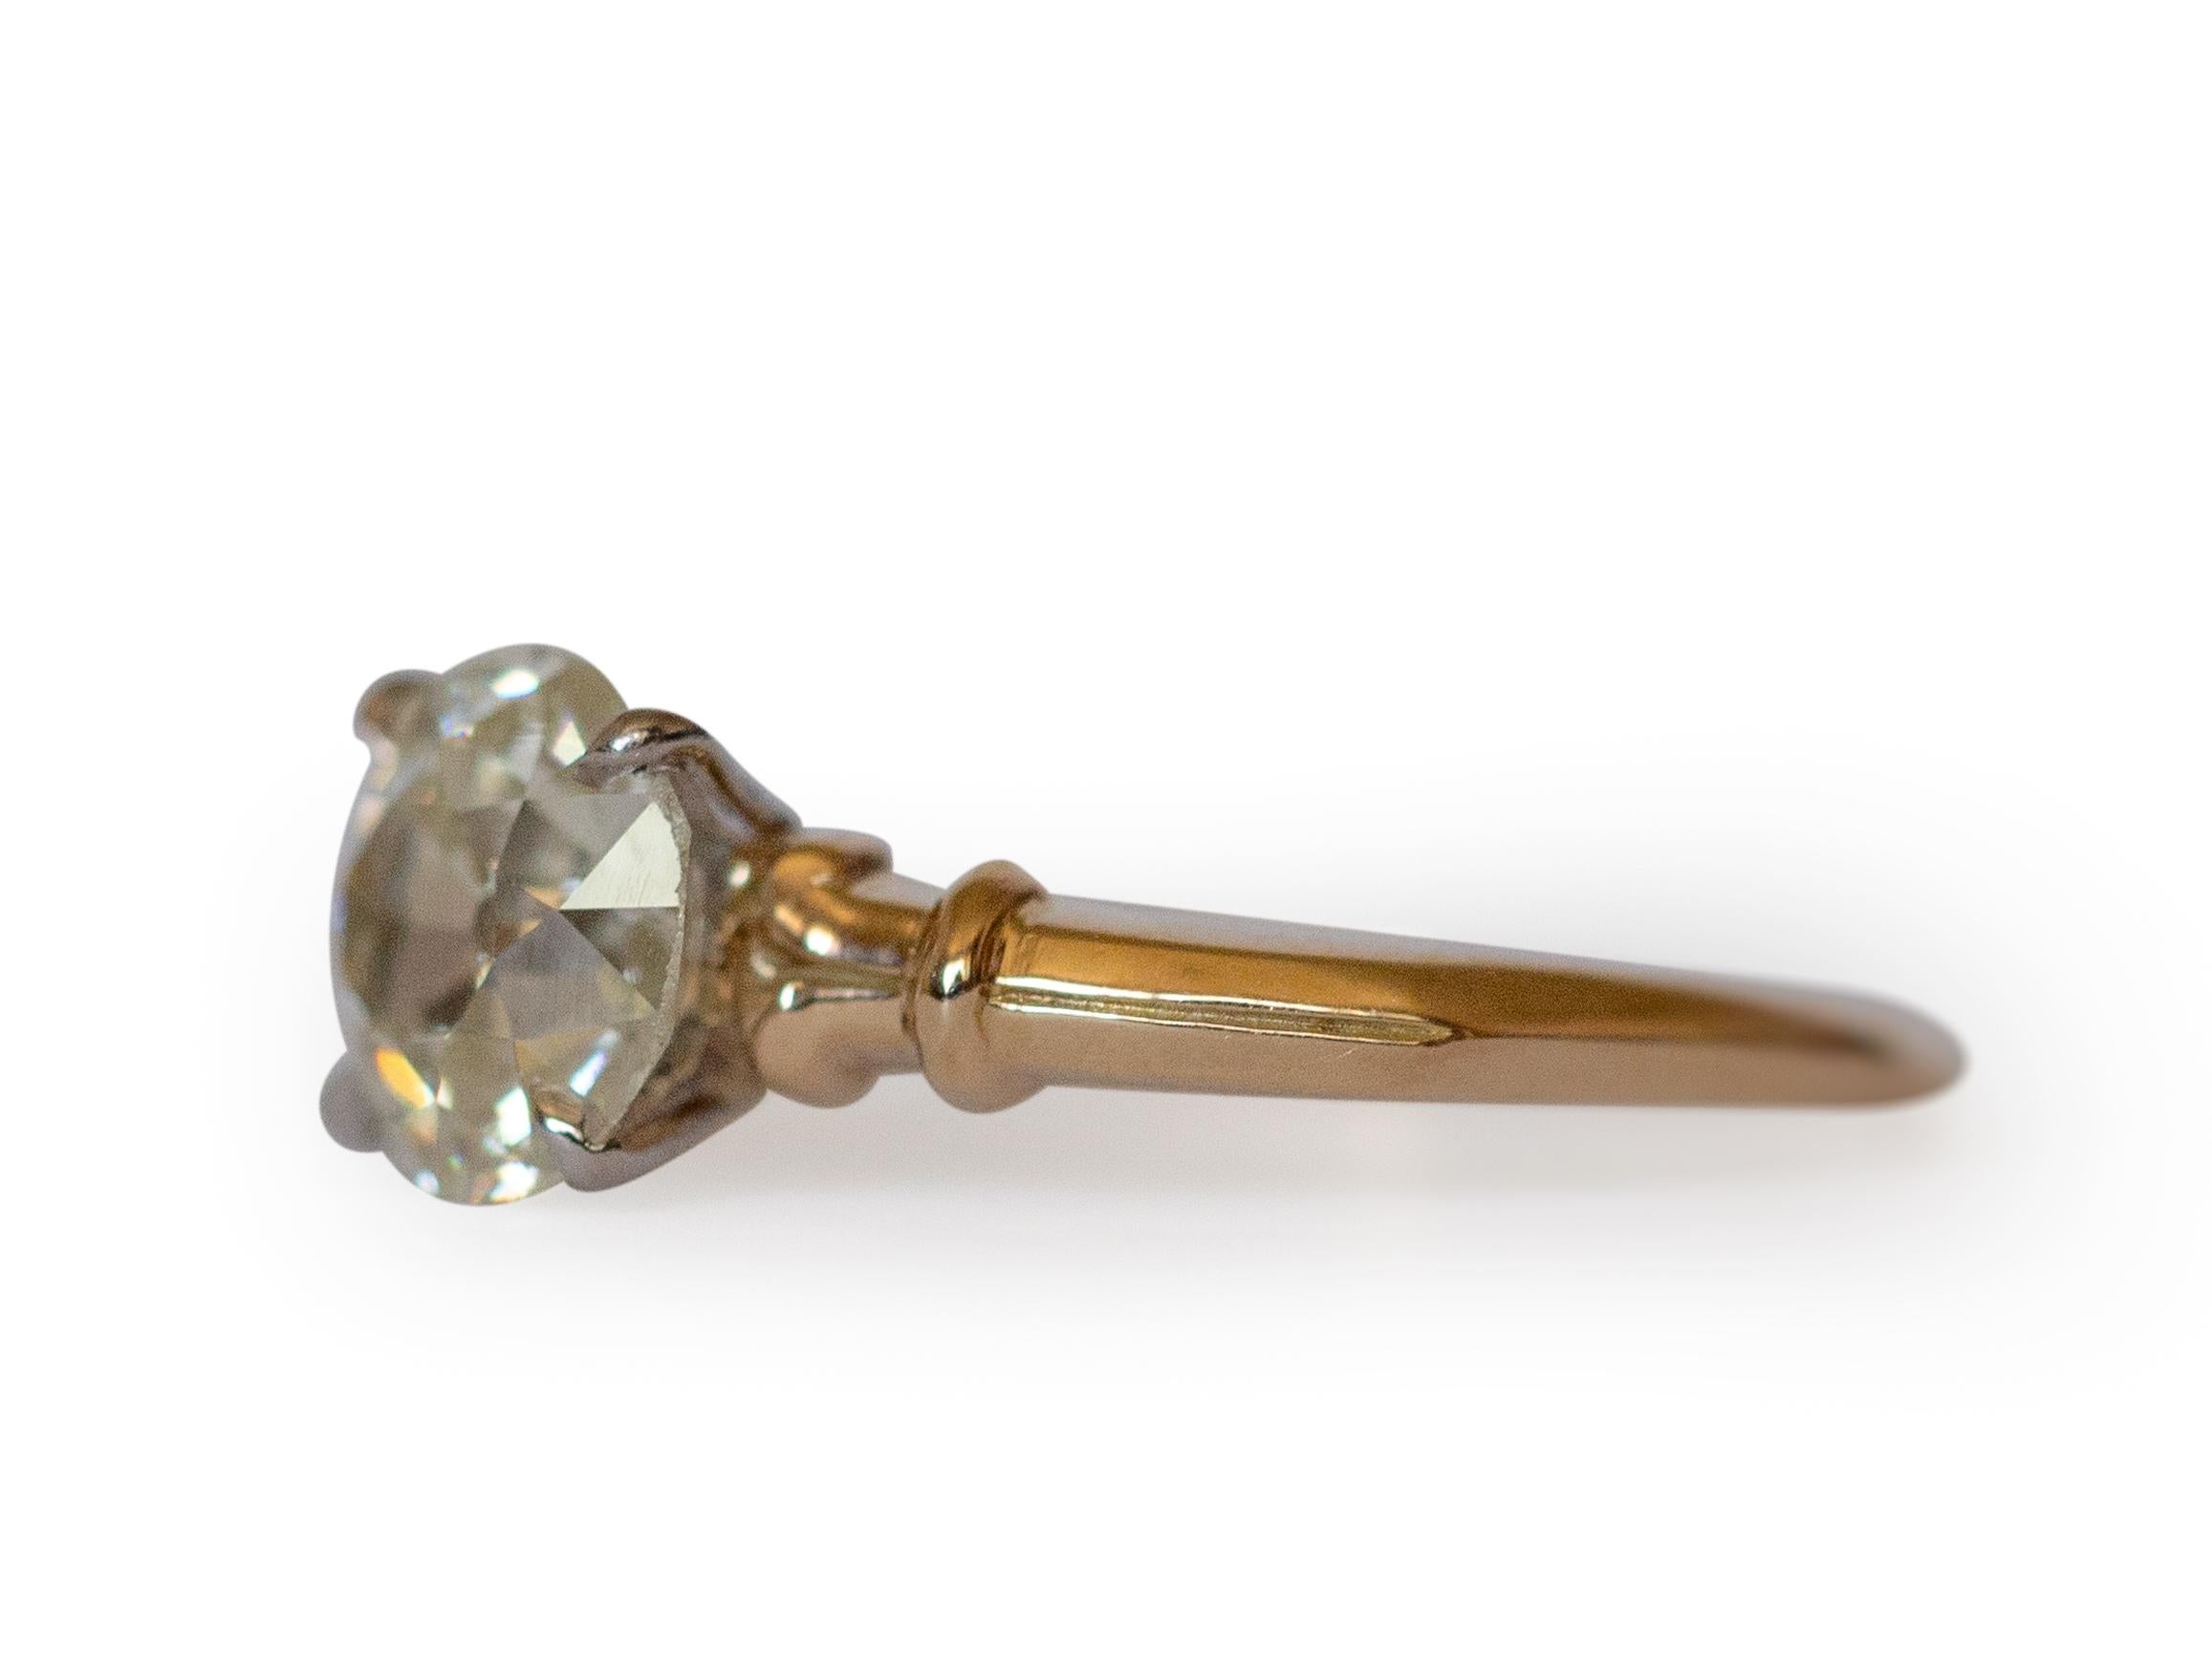 Ring Size: 6.5
Metal Type: 14K Yellow Gold and Palladium [Hallmarked, and Tested]
Weight:  3.5 grams

Center Diamond Details:
GIA REPORT #:1216129406
Weight: 1.49 carat
Cut: Old European Brilliant
Color: M
Clarity: VS1



Finger to Top of Stone